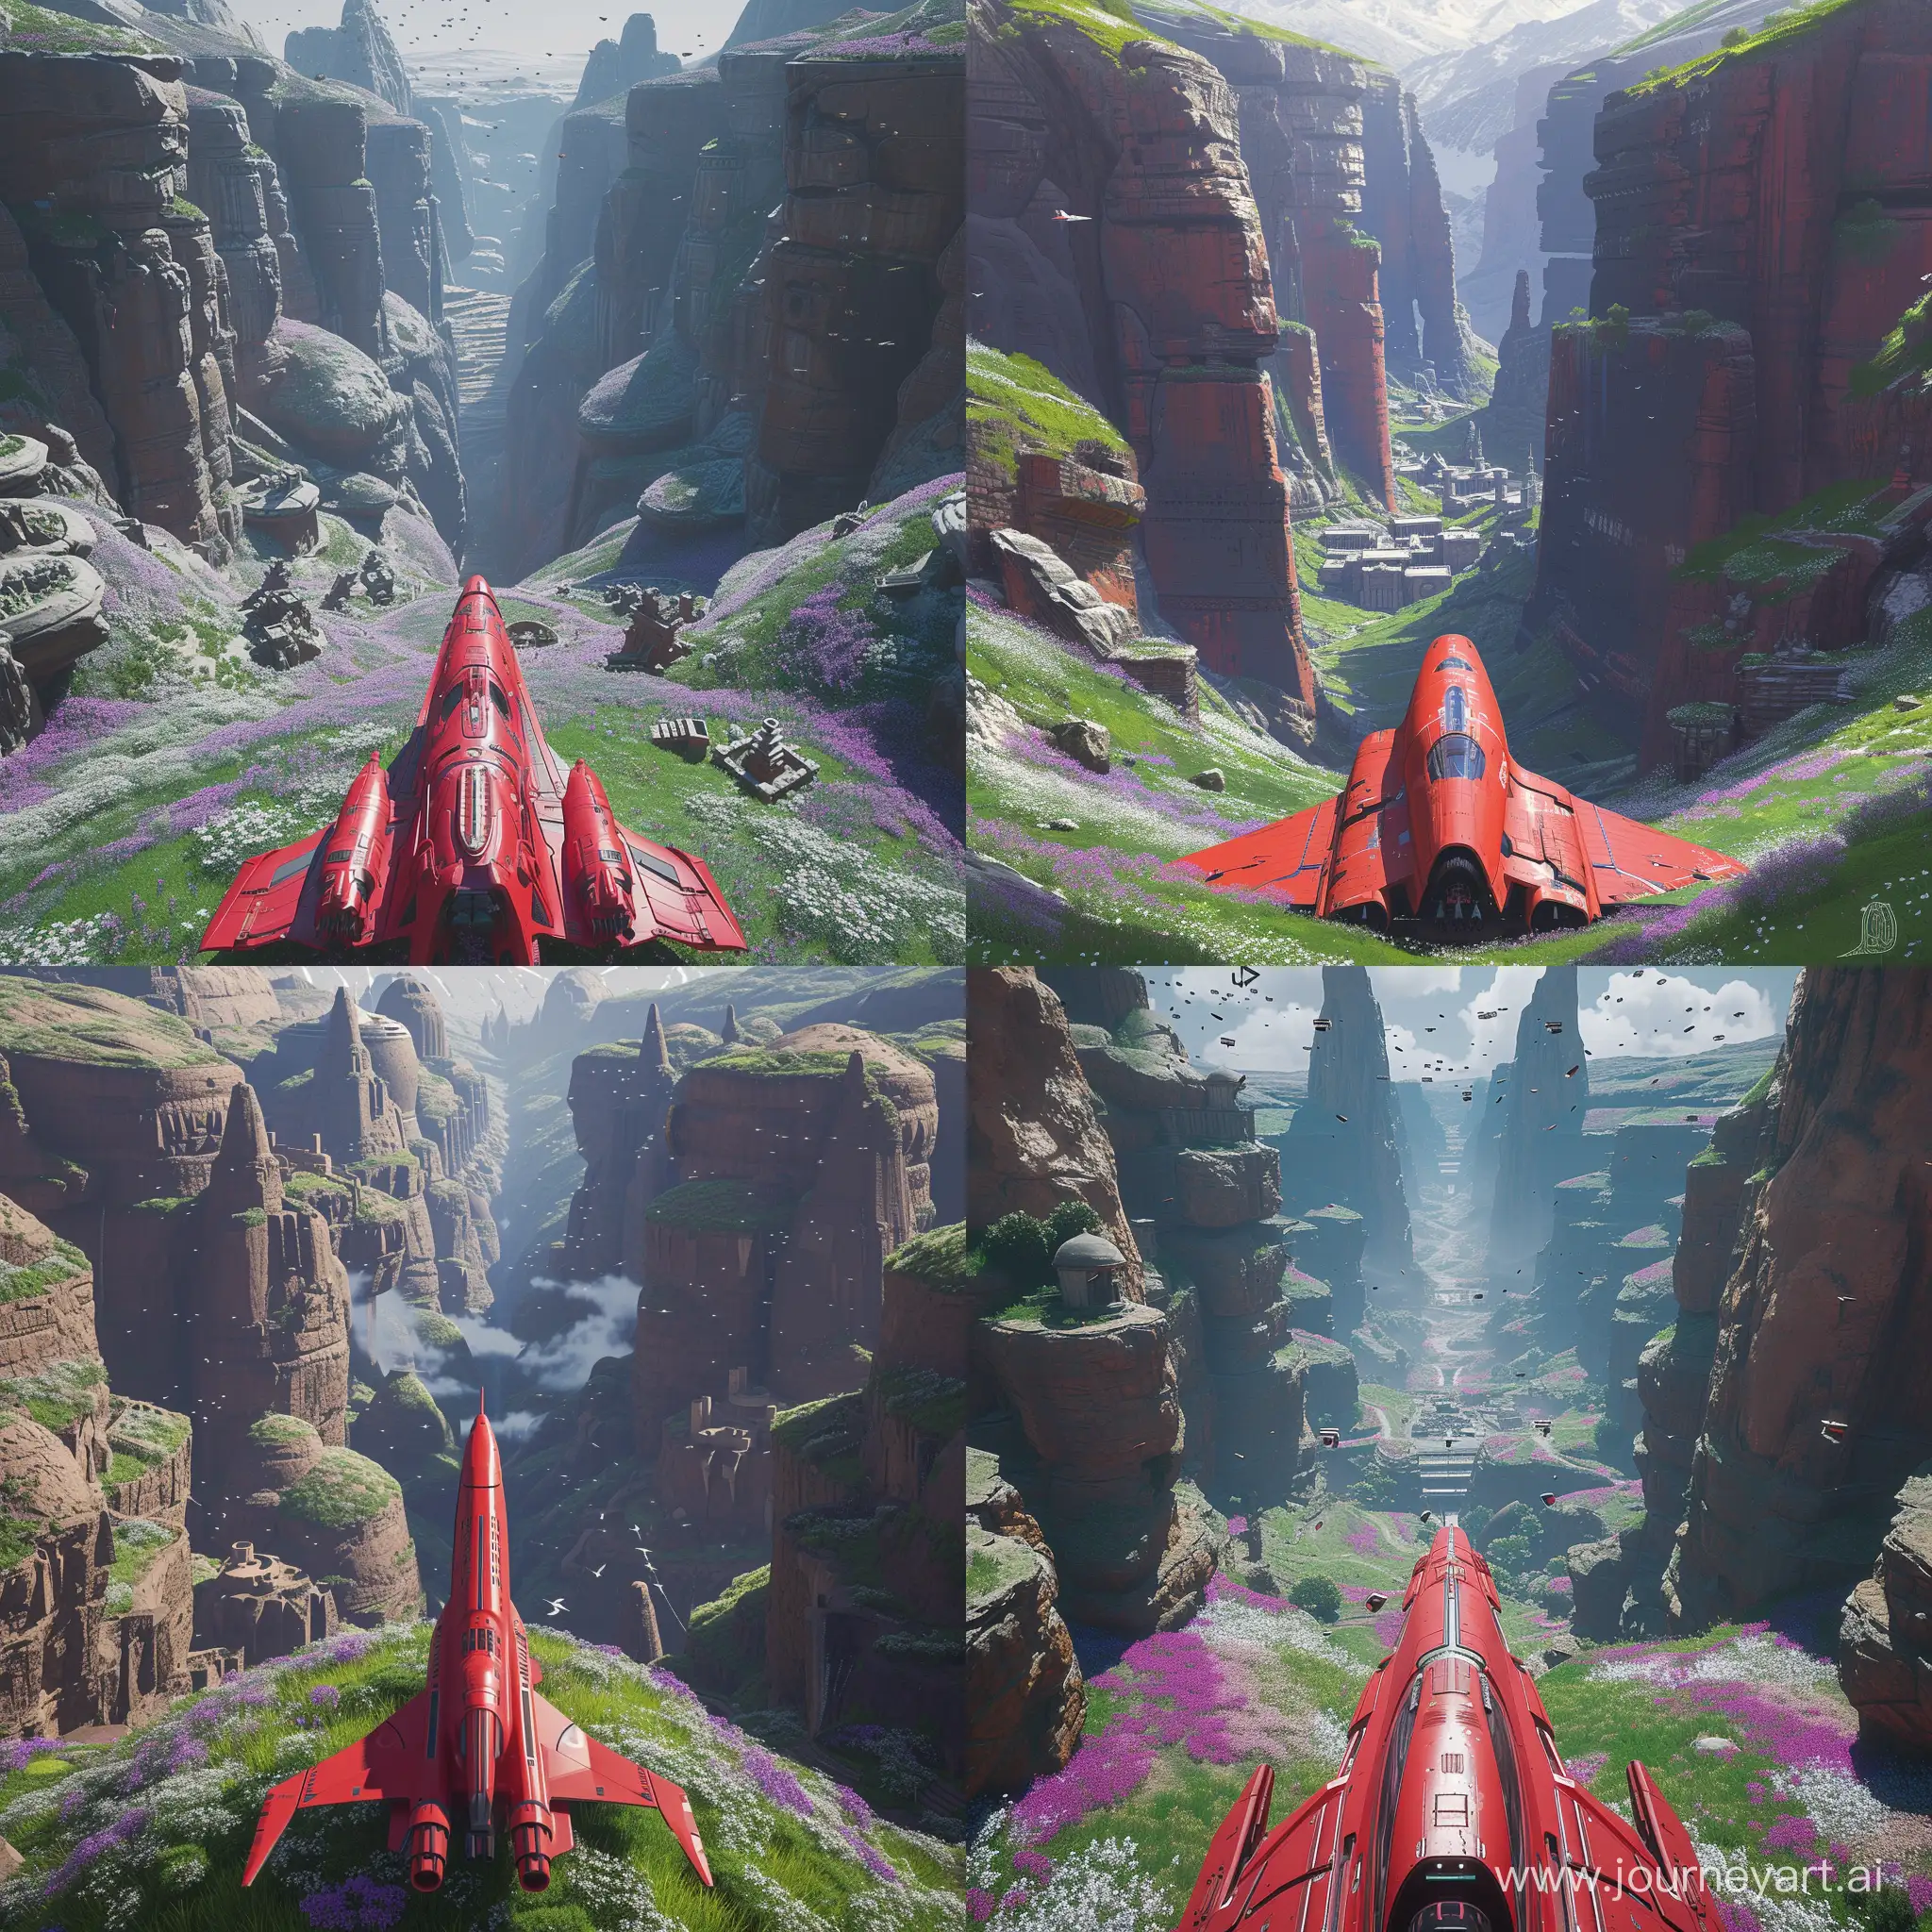 Majestic-Red-Spaceship-Overlooking-a-Lush-Gorge-and-Ancient-Mountains